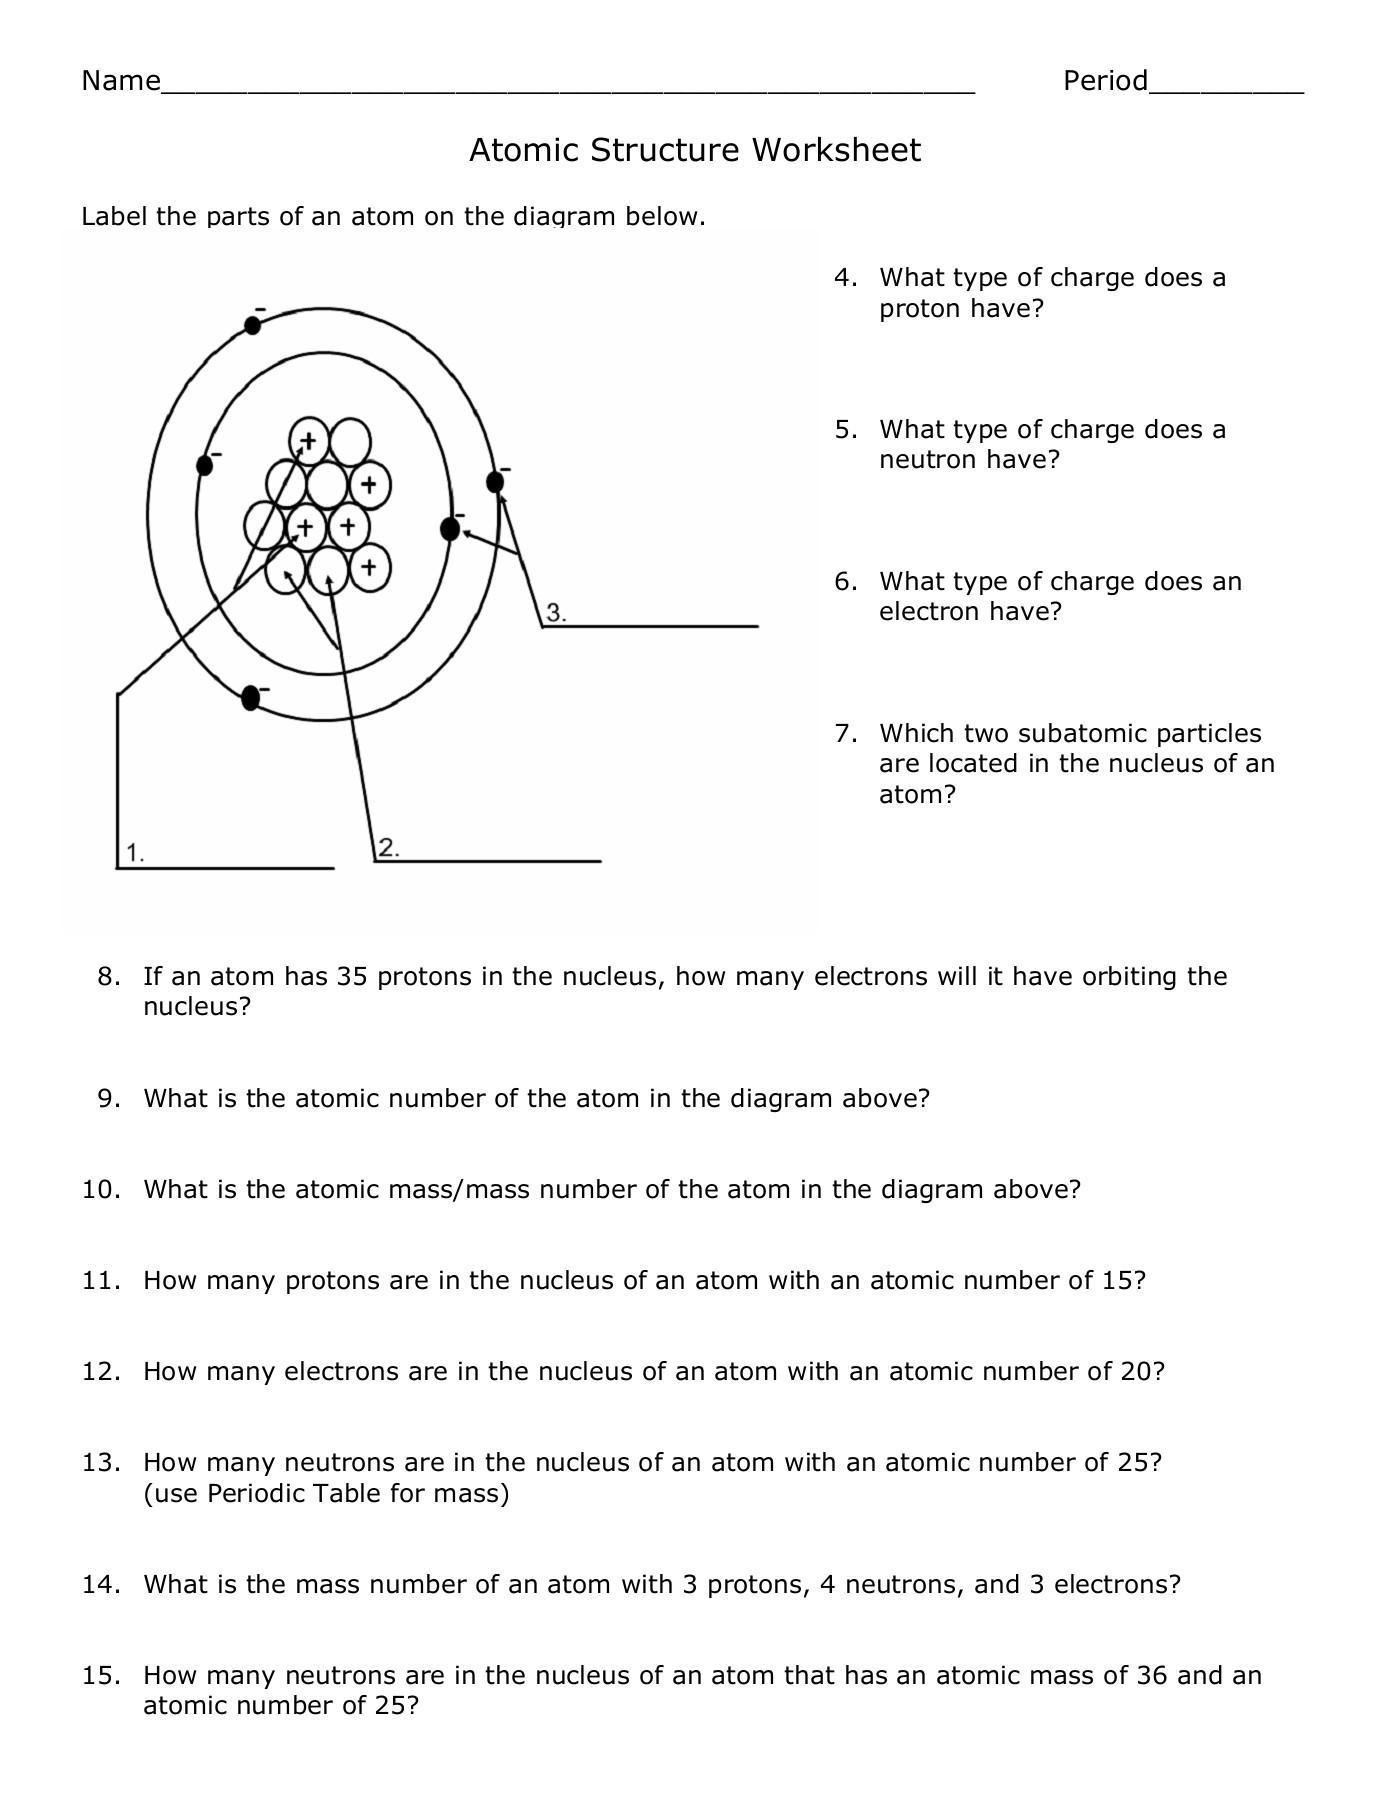 Structure Of the atom Worksheet atomic Structure Worksheet Shelby County Schools Pages 1